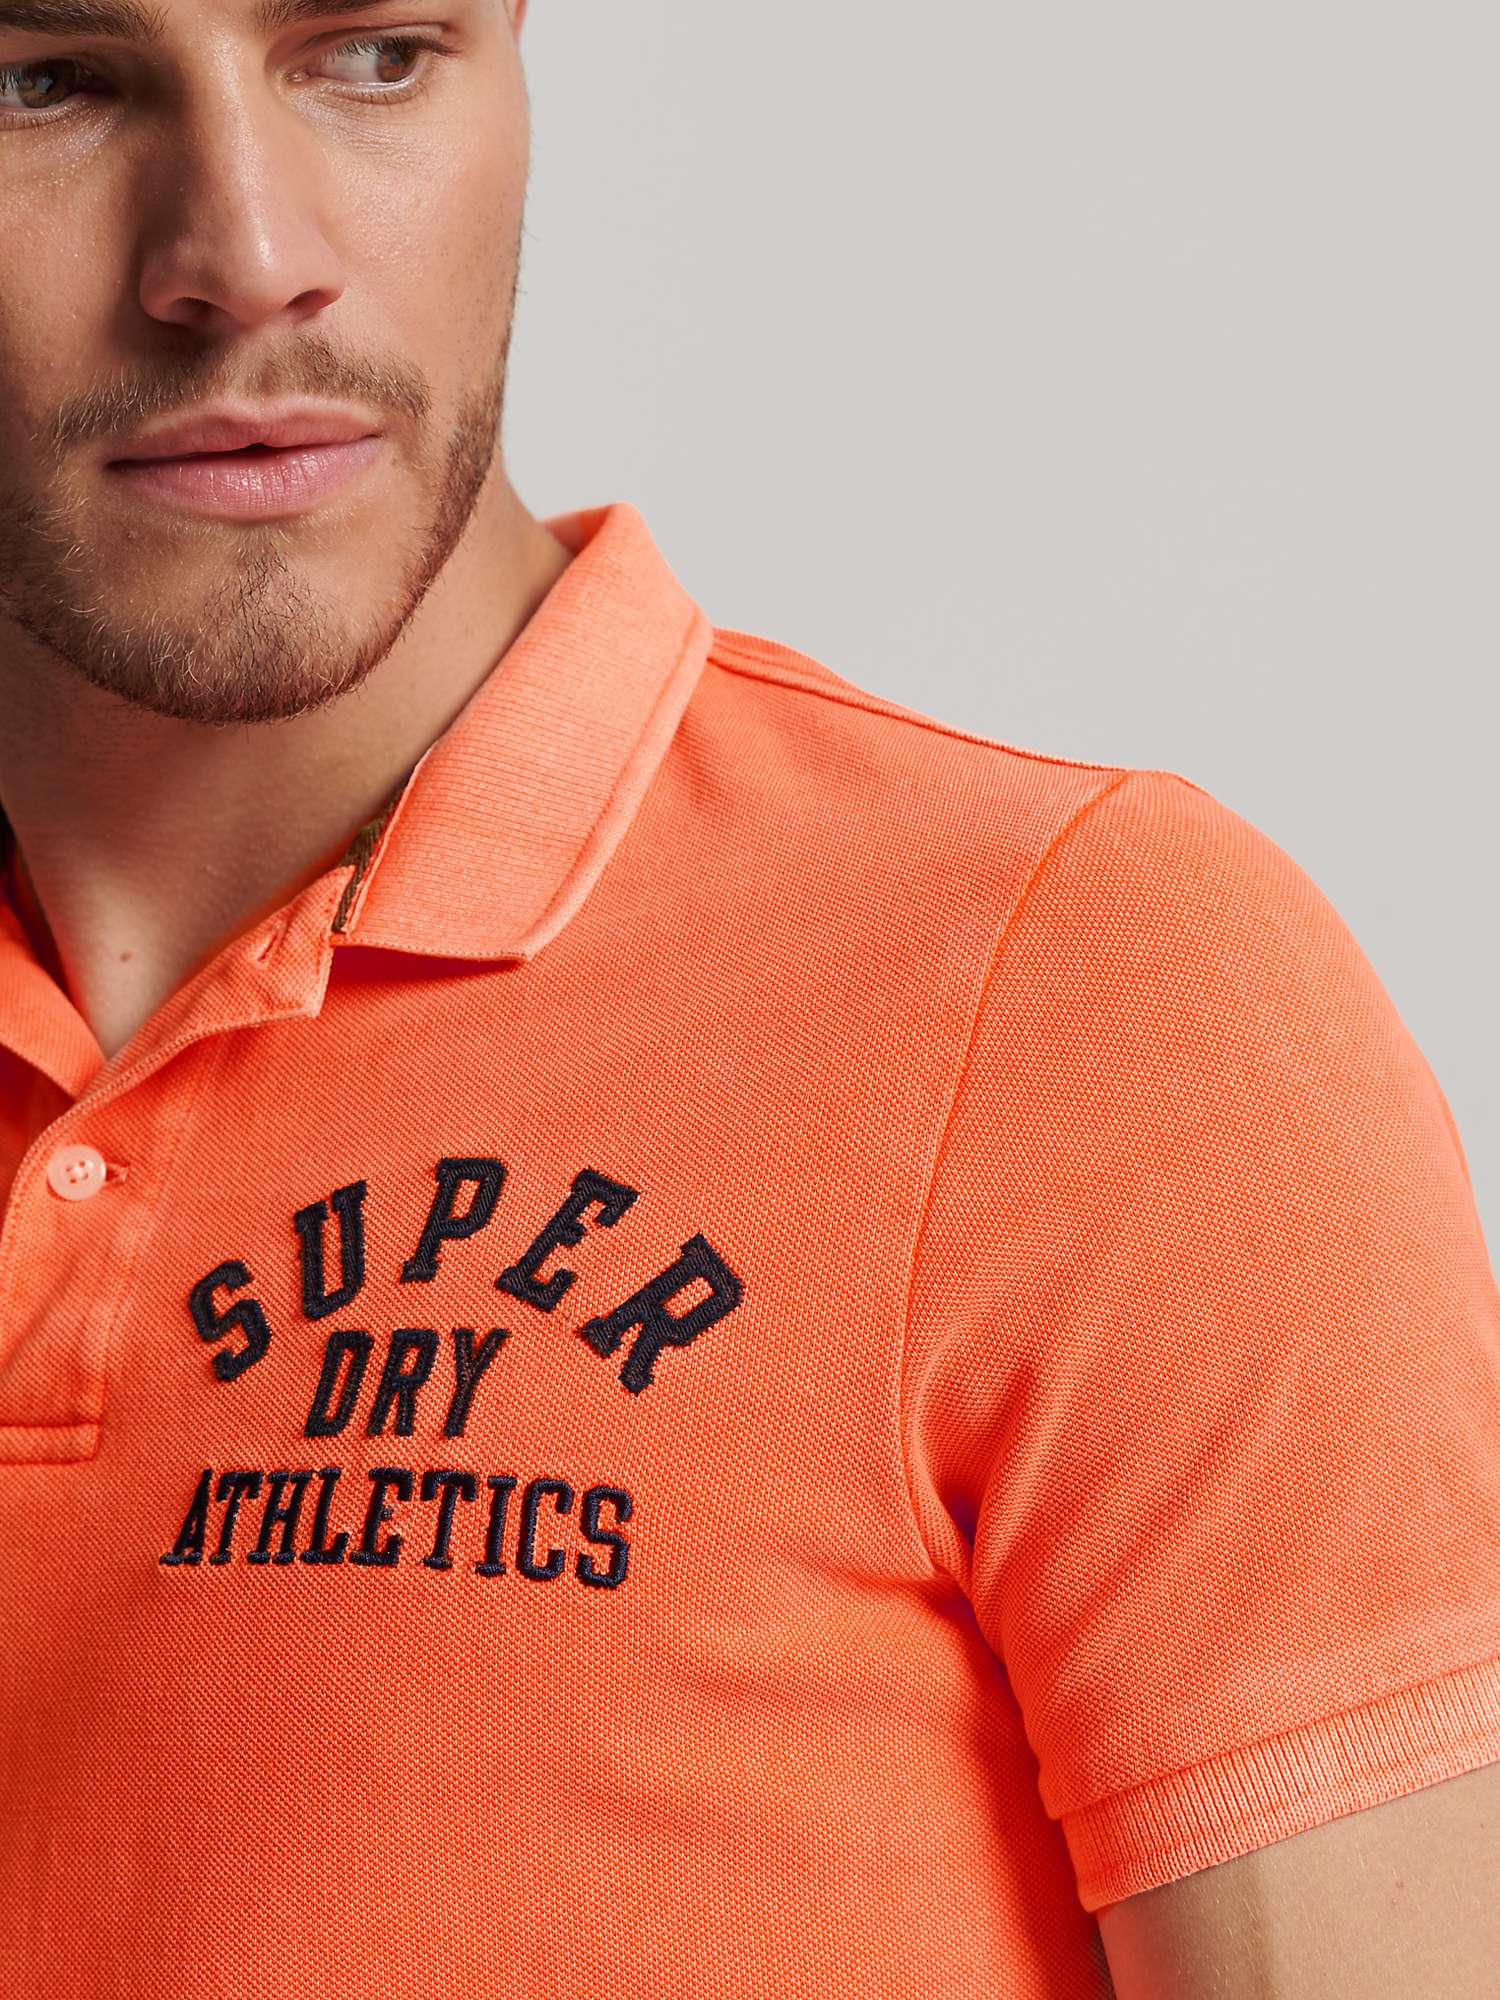 Buy Superdry Superstate Polo Shirt Online at johnlewis.com